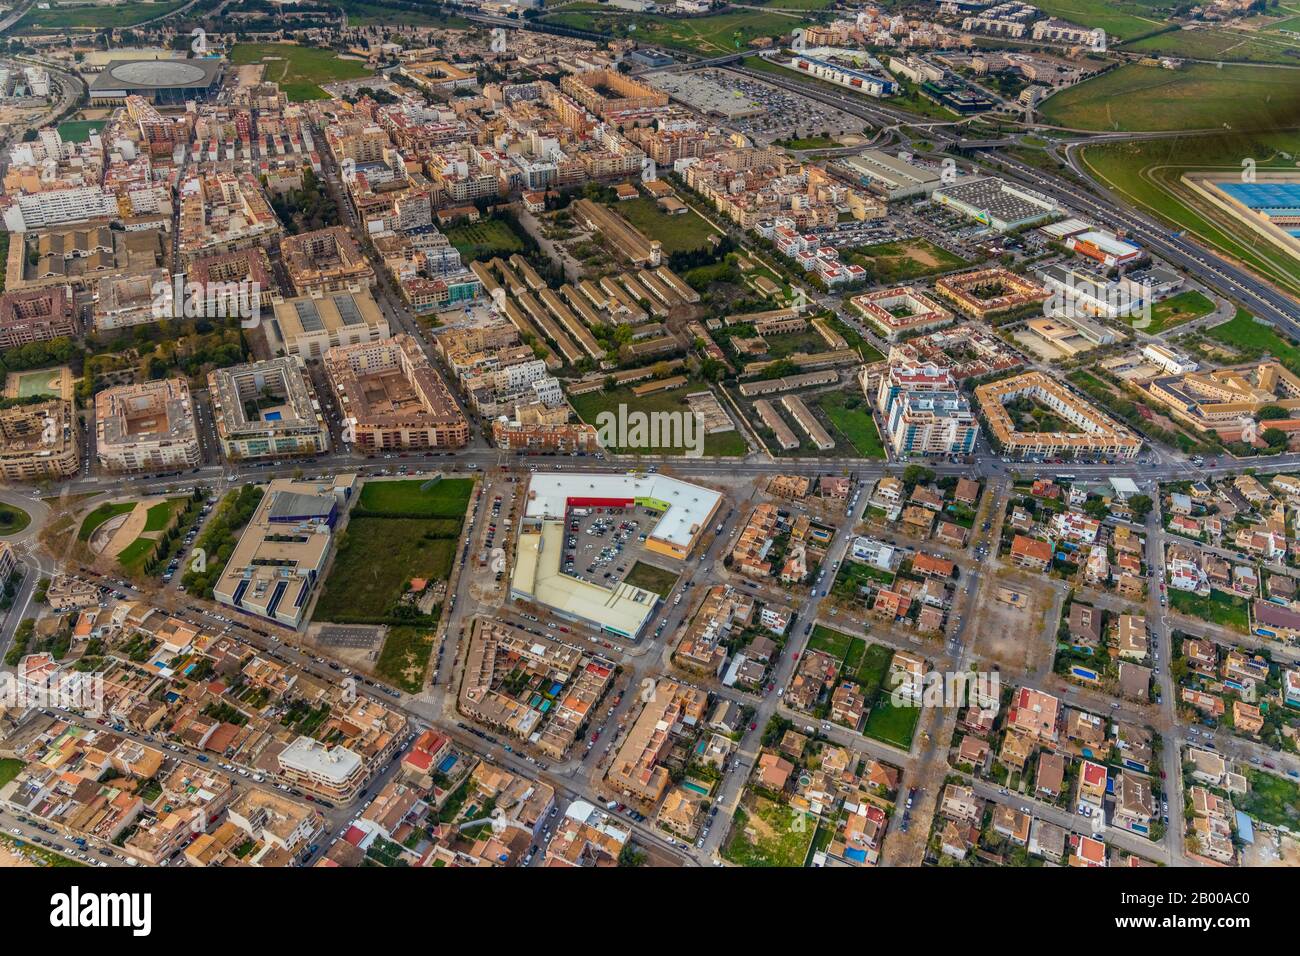 Aerial photo, residential and commercial area, Amanecer, Cas Capiscol, Palma, Mallorca, Spain, Europe, Balearic Islands, Arena, Consorci Velòdrom Ille Stock Photo